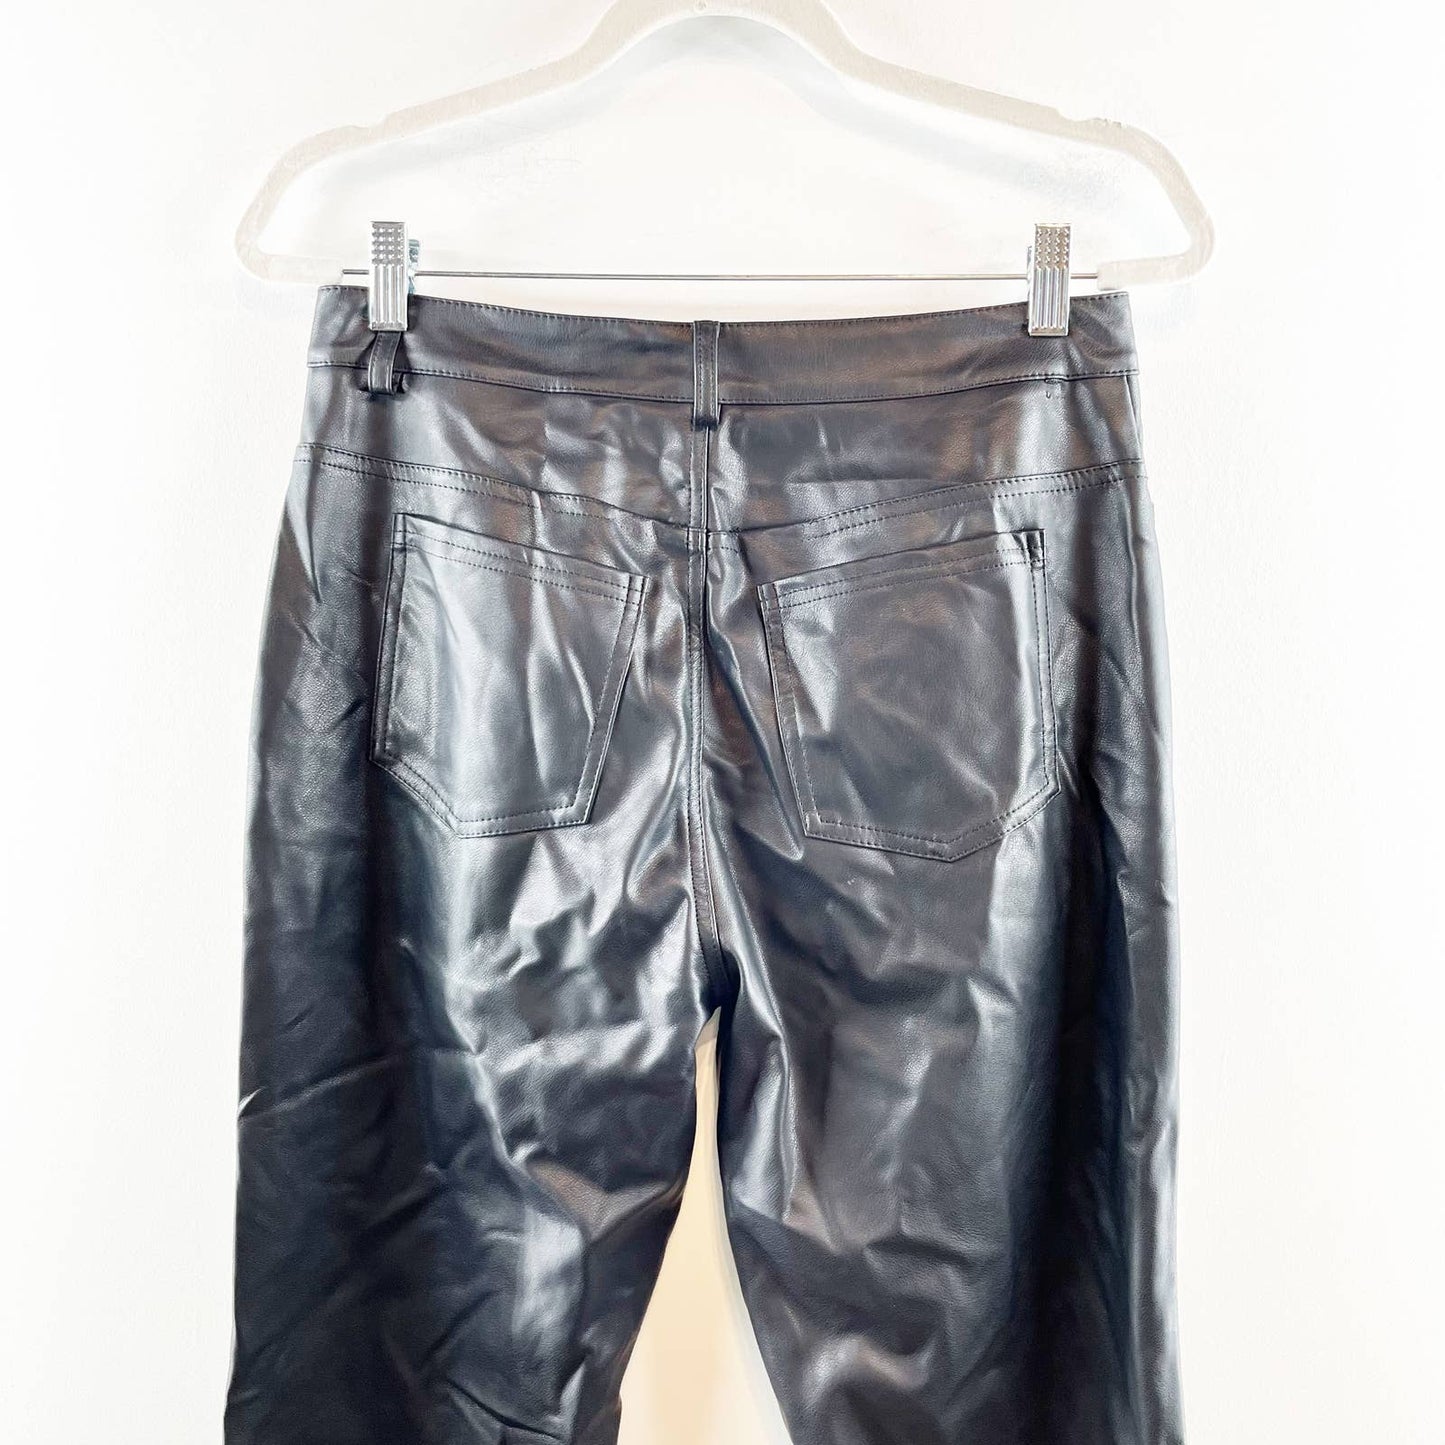 Le Lis Collection Faux Leather Pull On High Waisted Bootcut Flare Pants Black M